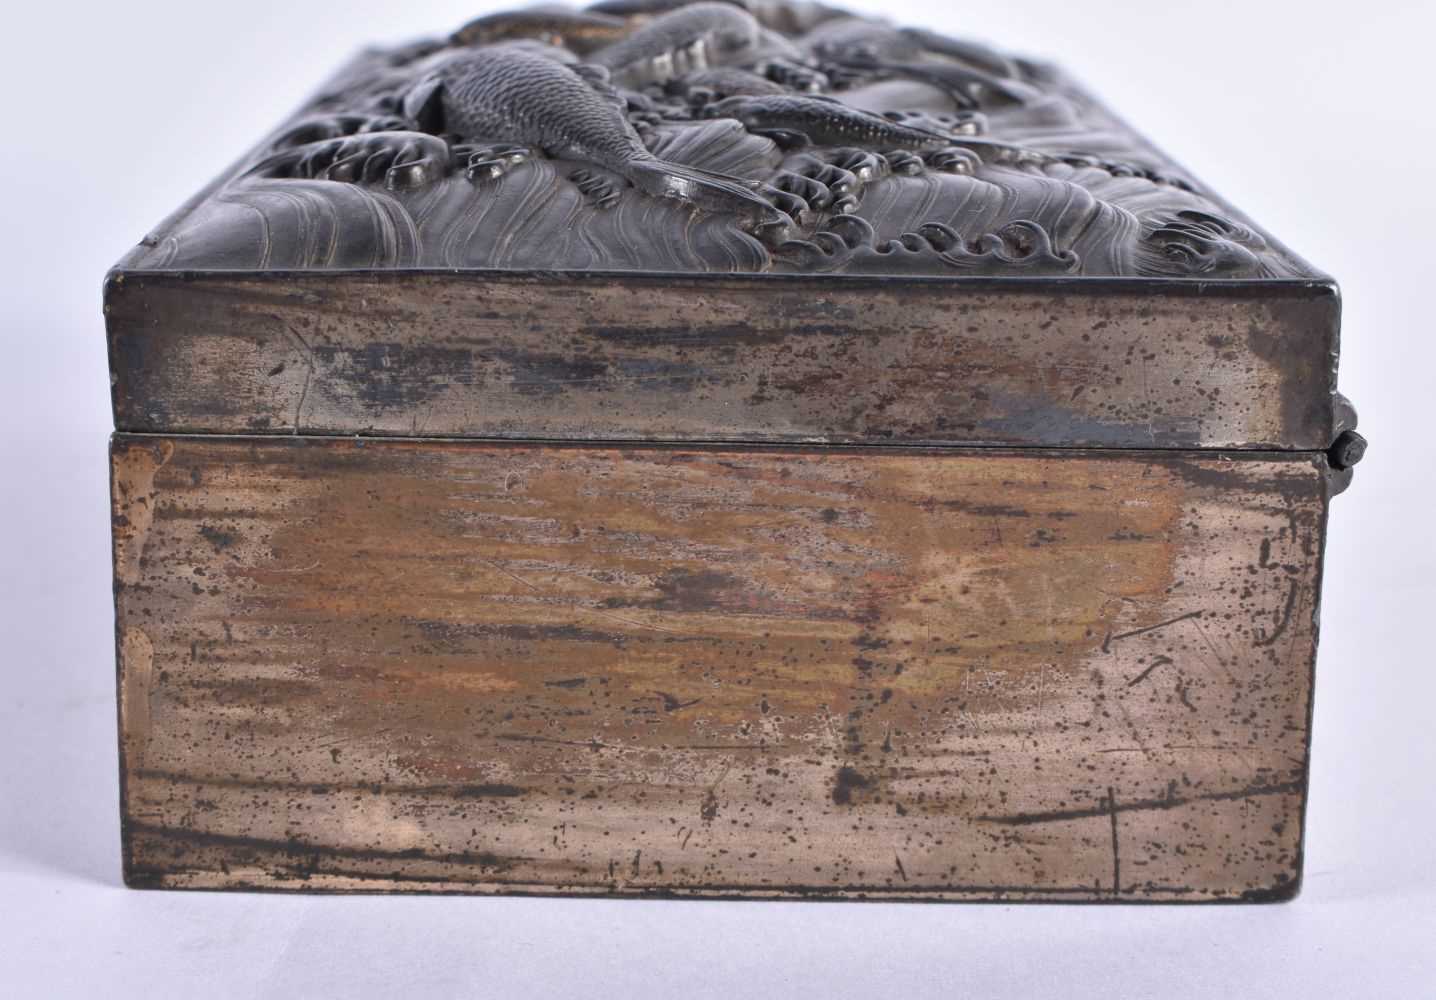 A 19TH CENTURY JAPANESE MEIJI PERIOD SILVERED BRONZE TRINKET BOX decorated with carp crashing - Image 4 of 5